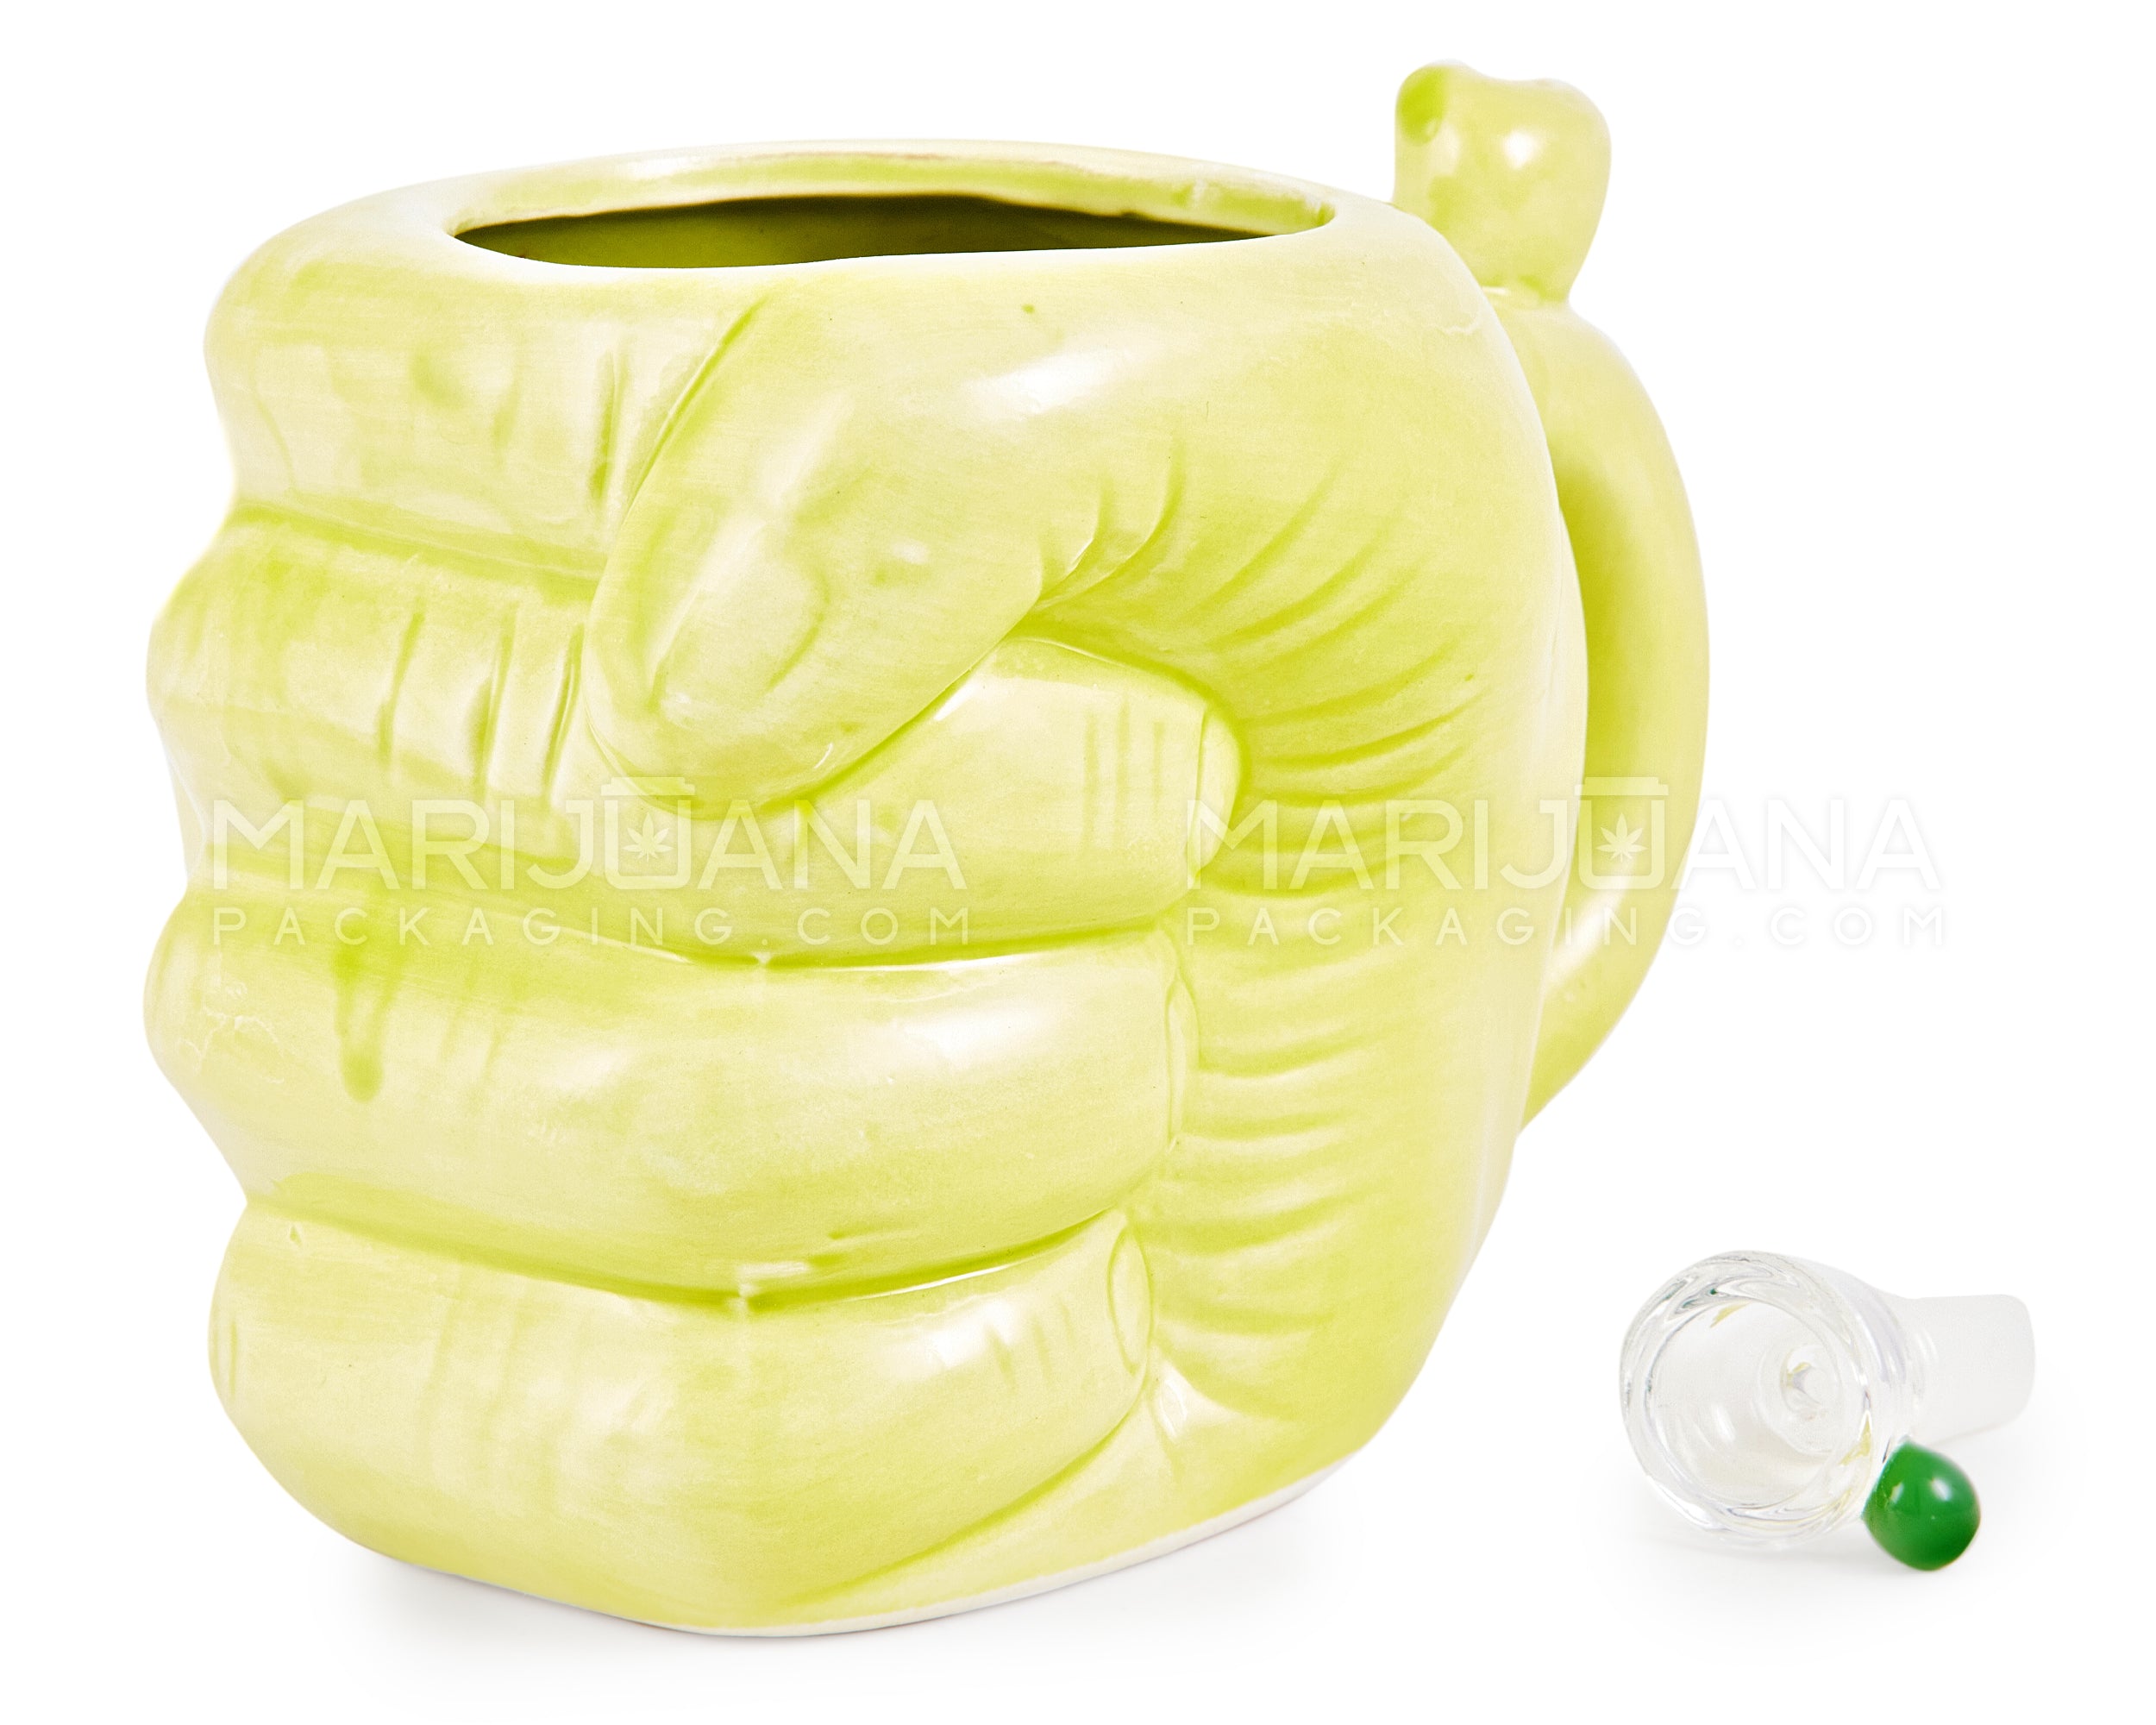 Large Fist Mug Painted Ceramic Pipe | 4.5in Tall - 14mm Bowl - Green - 3